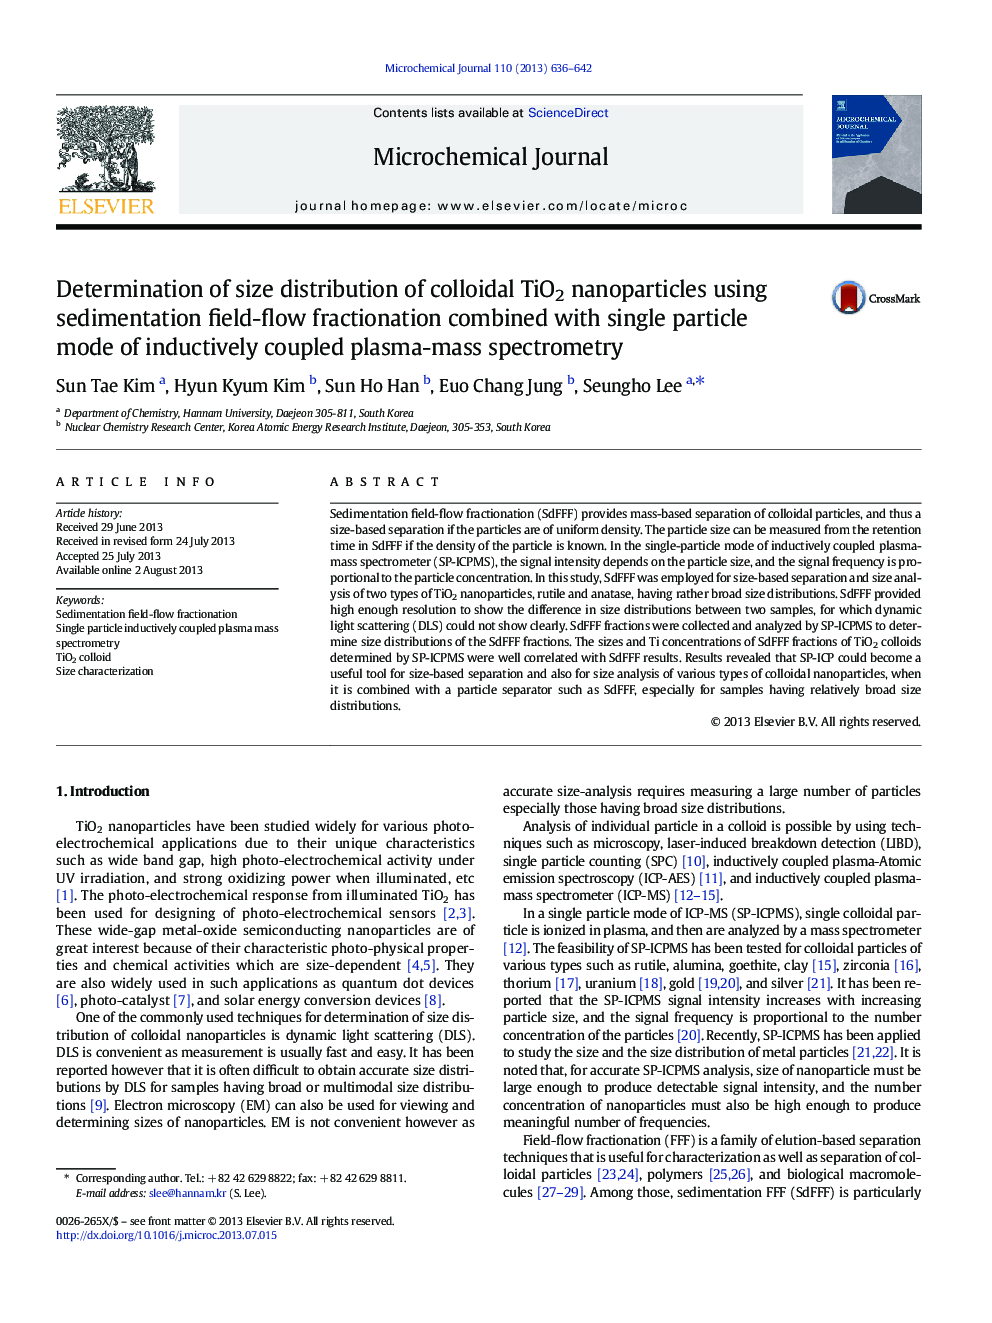 Determination of size distribution of colloidal TiO2 nanoparticles using sedimentation field-flow fractionation combined with single particle mode of inductively coupled plasma-mass spectrometry